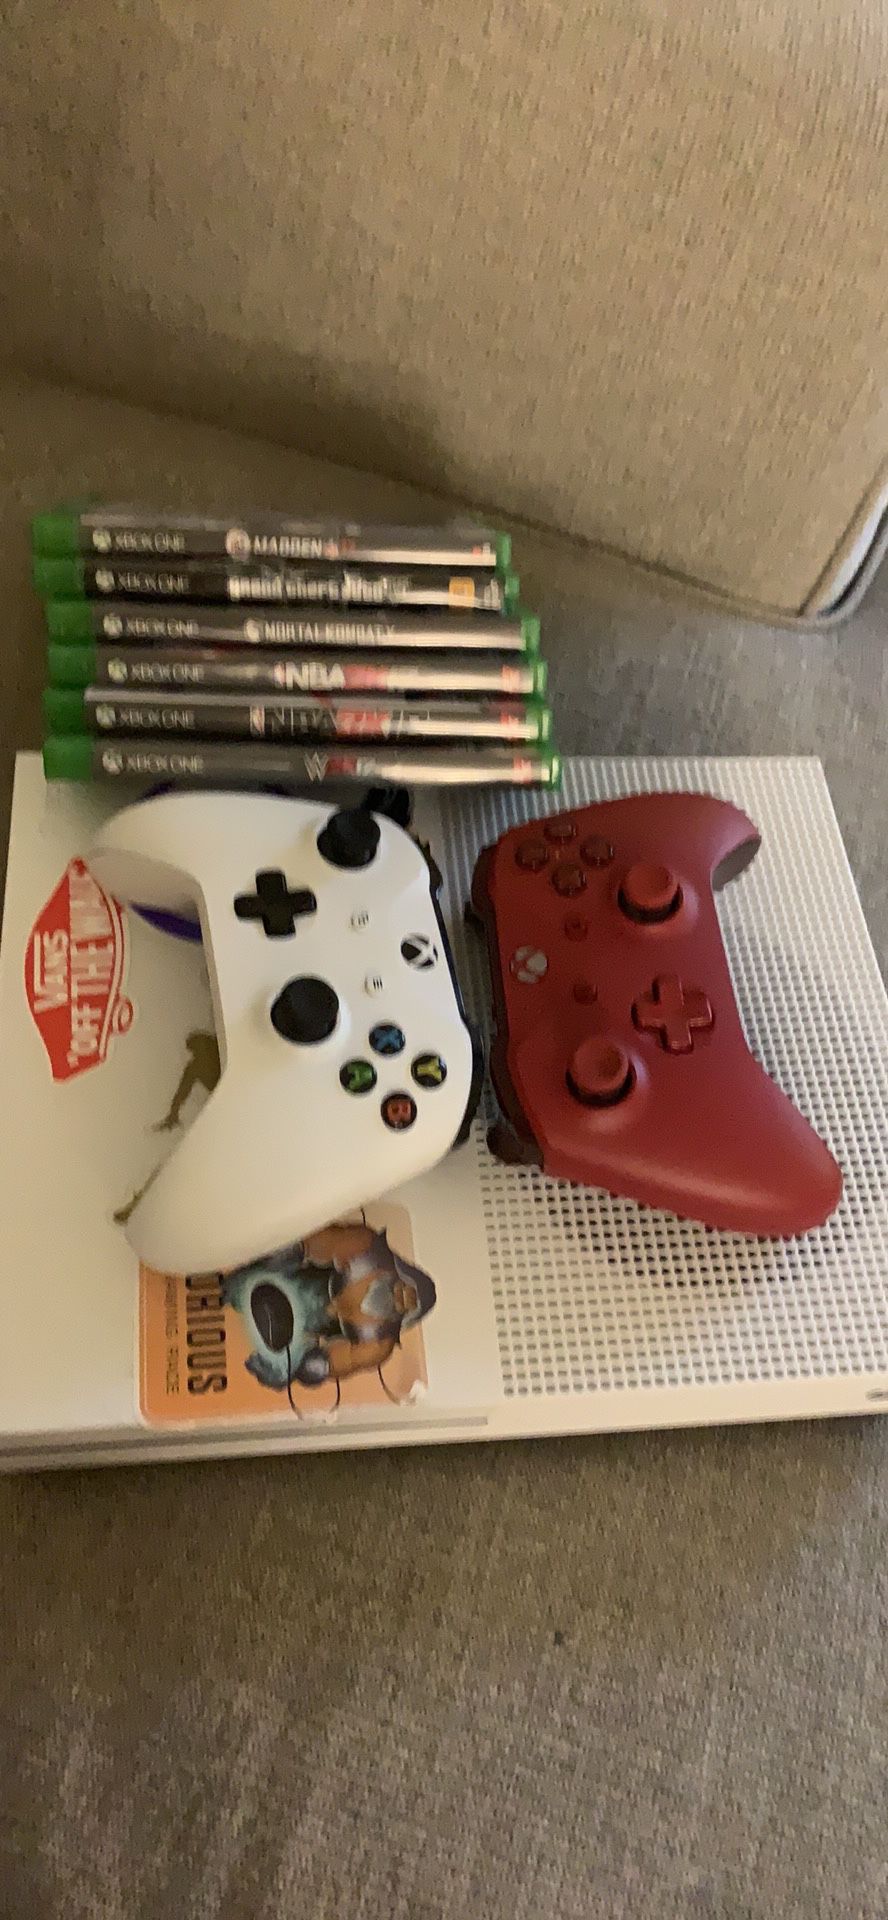 Xbox one S 1TB with 2 controllers